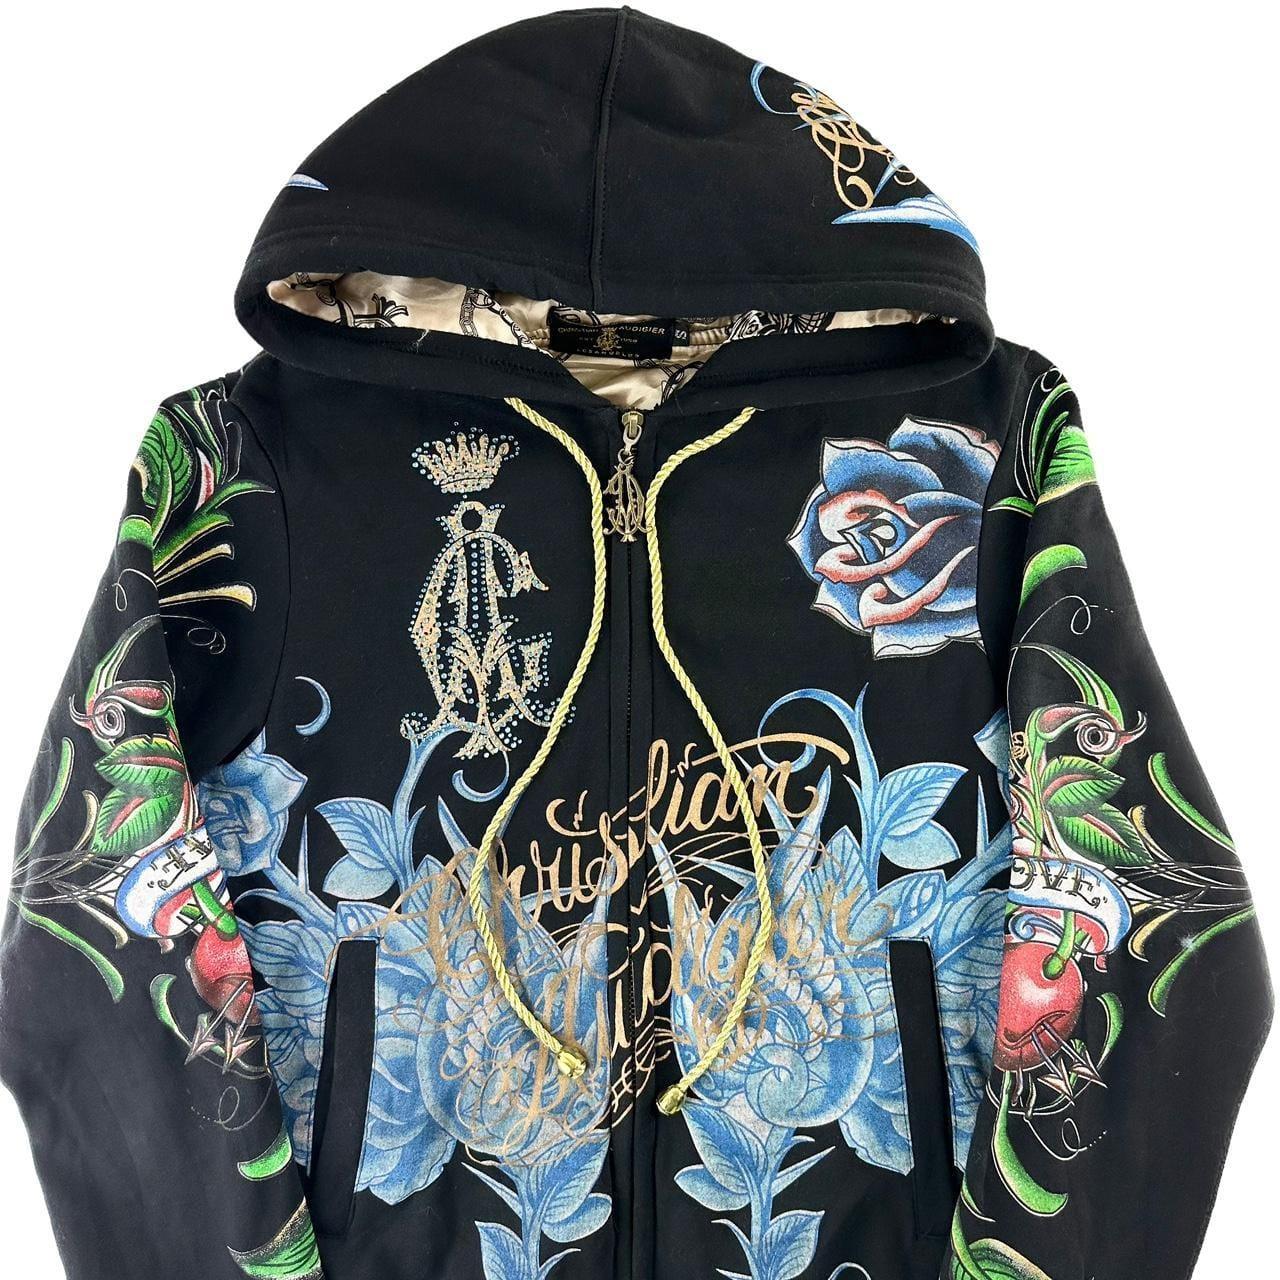 Vintage Christian Audigier zip hoodie woman’s size S - Known Source